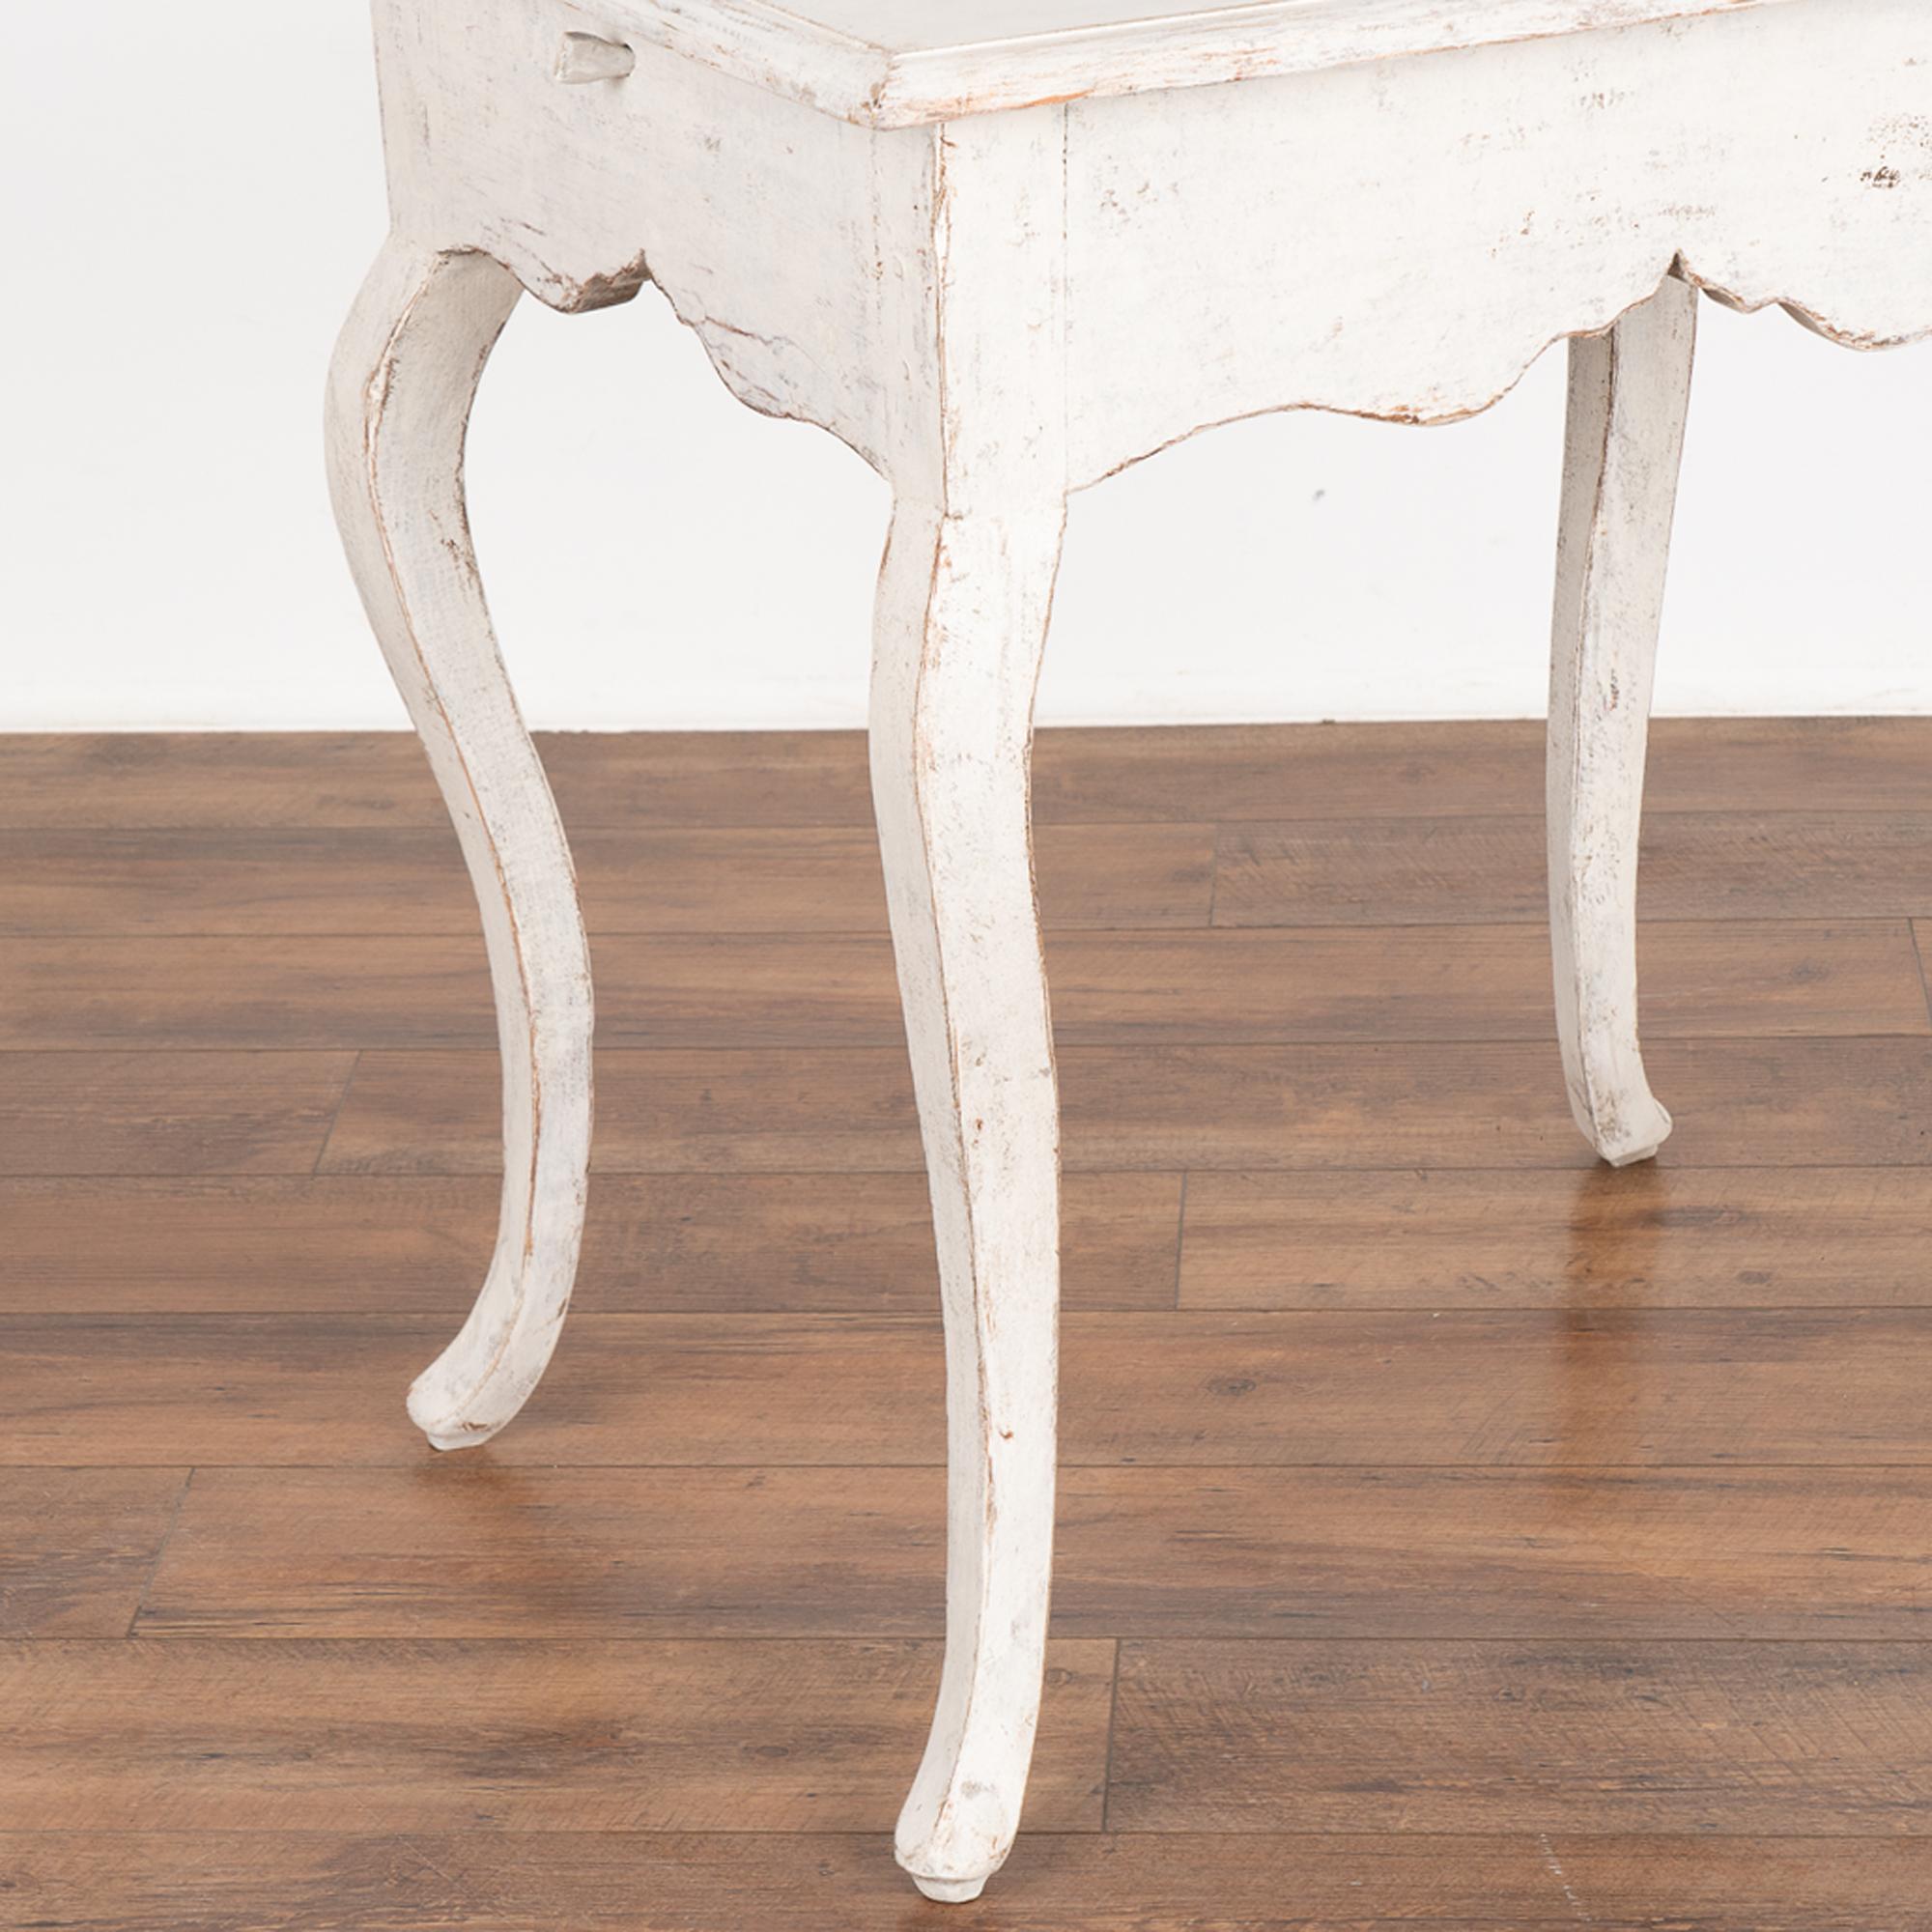 White Gustavian Side Table with Cabriolet Legs, Sweden circa 1800-20 In Good Condition For Sale In Round Top, TX